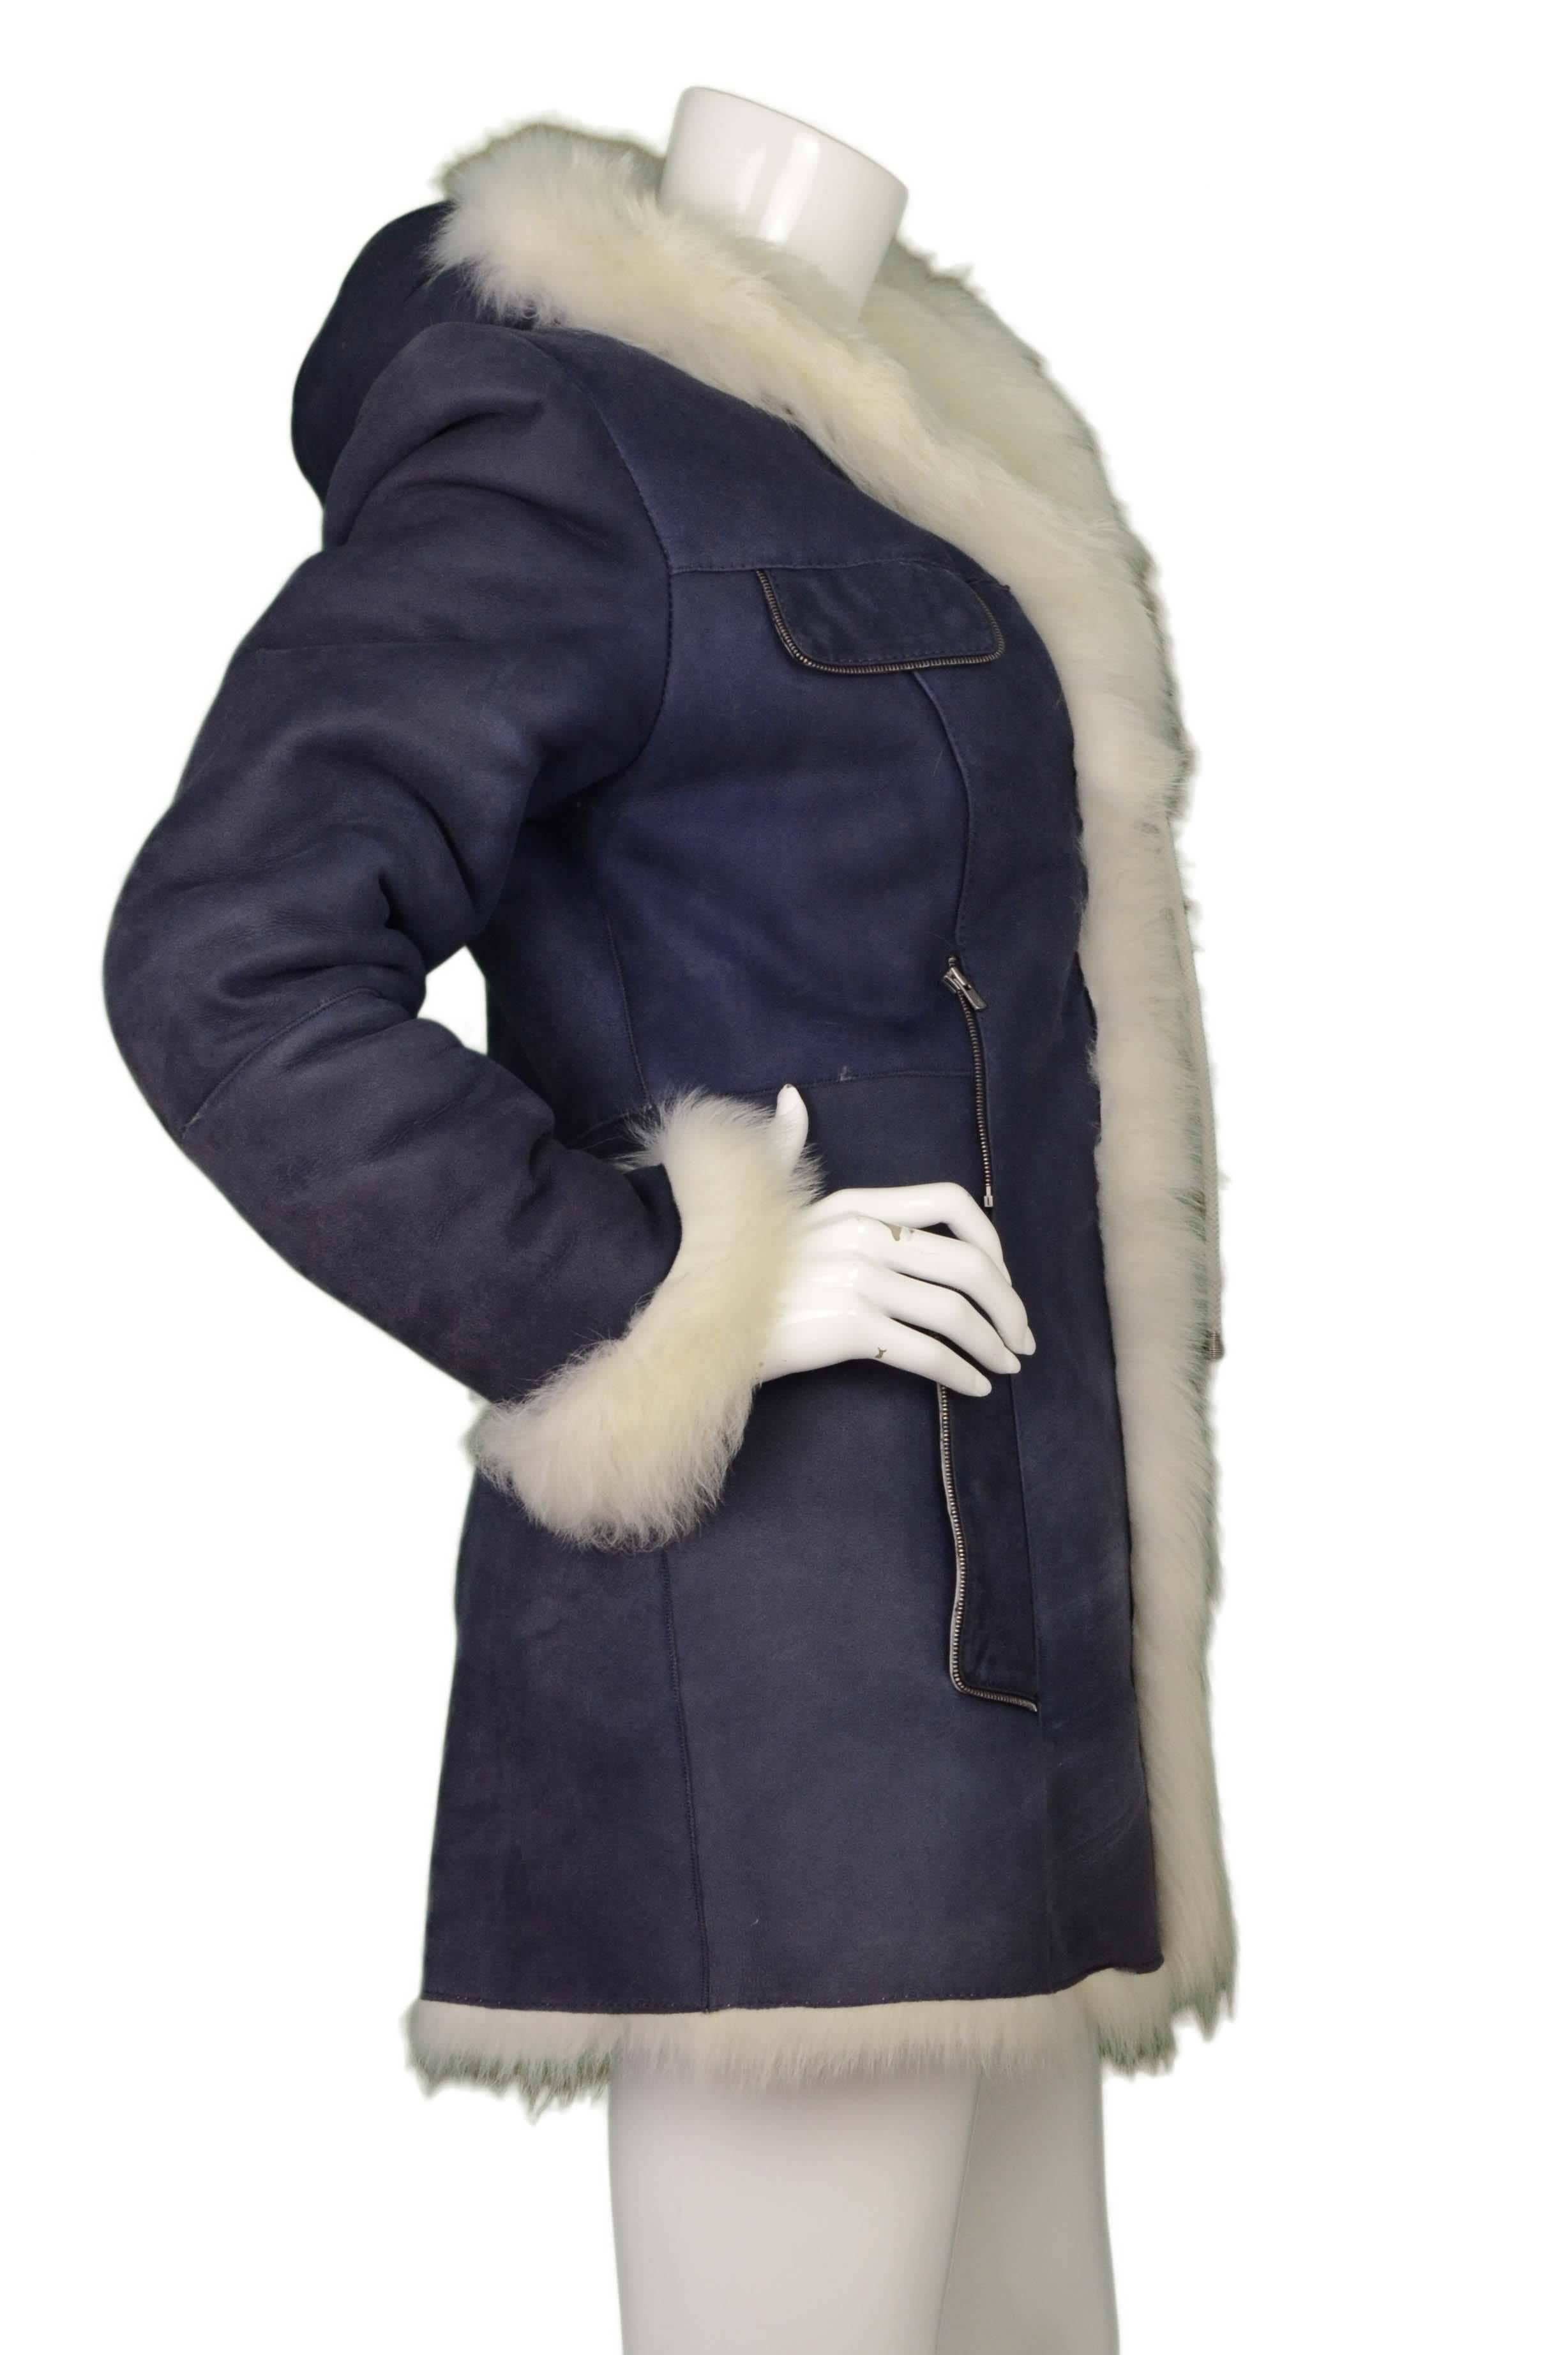 Armando Diaz Purple Suede & White Fur Coat 
Features white fur trim, lining and hood
Made In: Turkey
Color: Purple/blue and white
Composition: Not given- believed to be 100% suede and 100% fur
Lining: White, fur
Closure/Opening: Button down